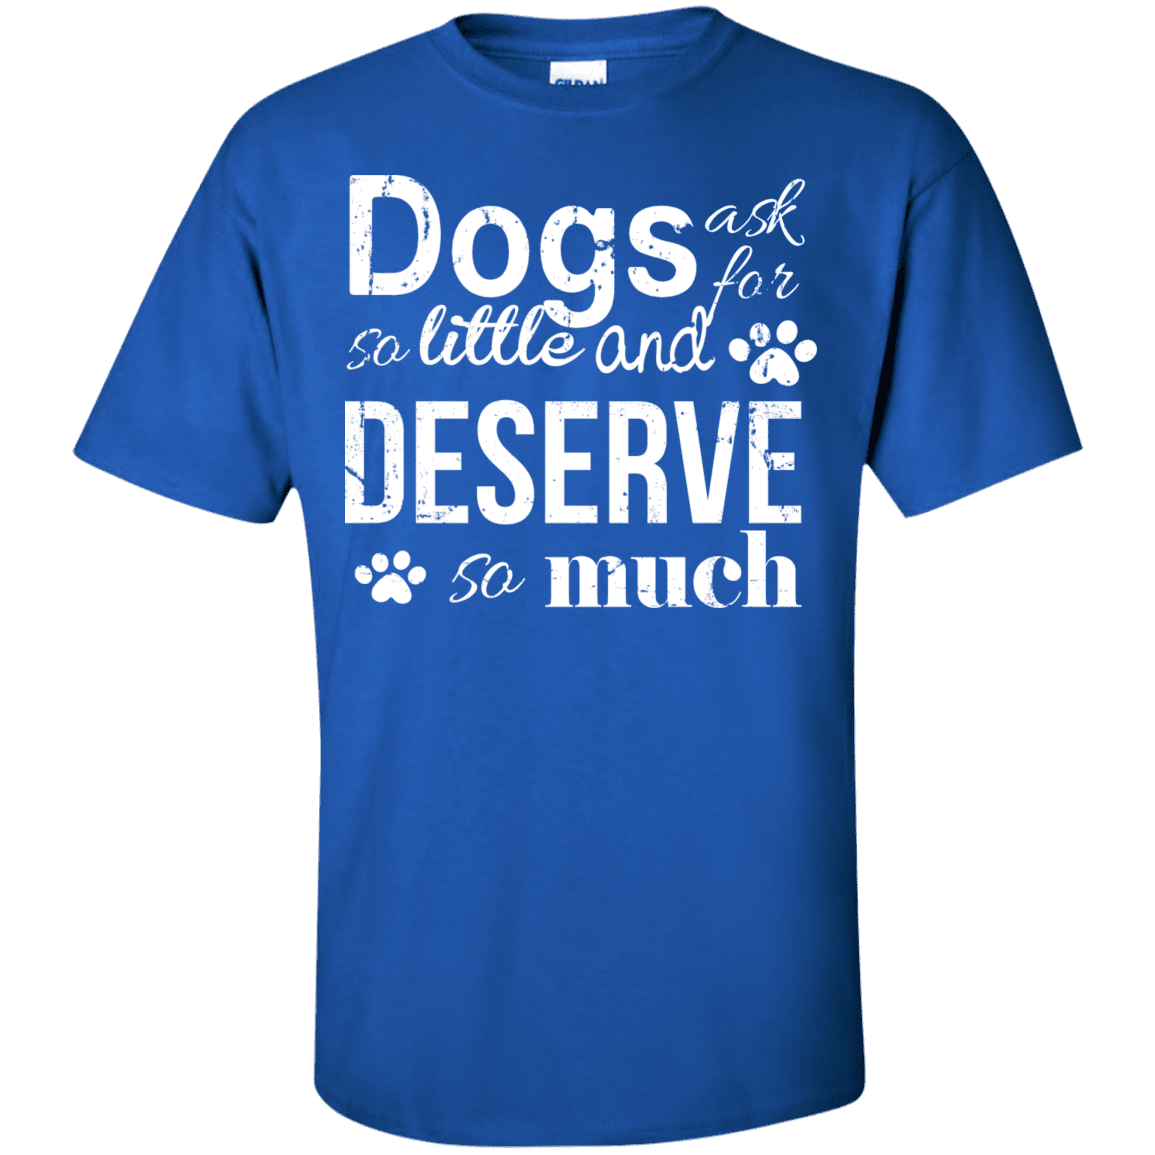 Dogs Deserve So Much - T Shirt.